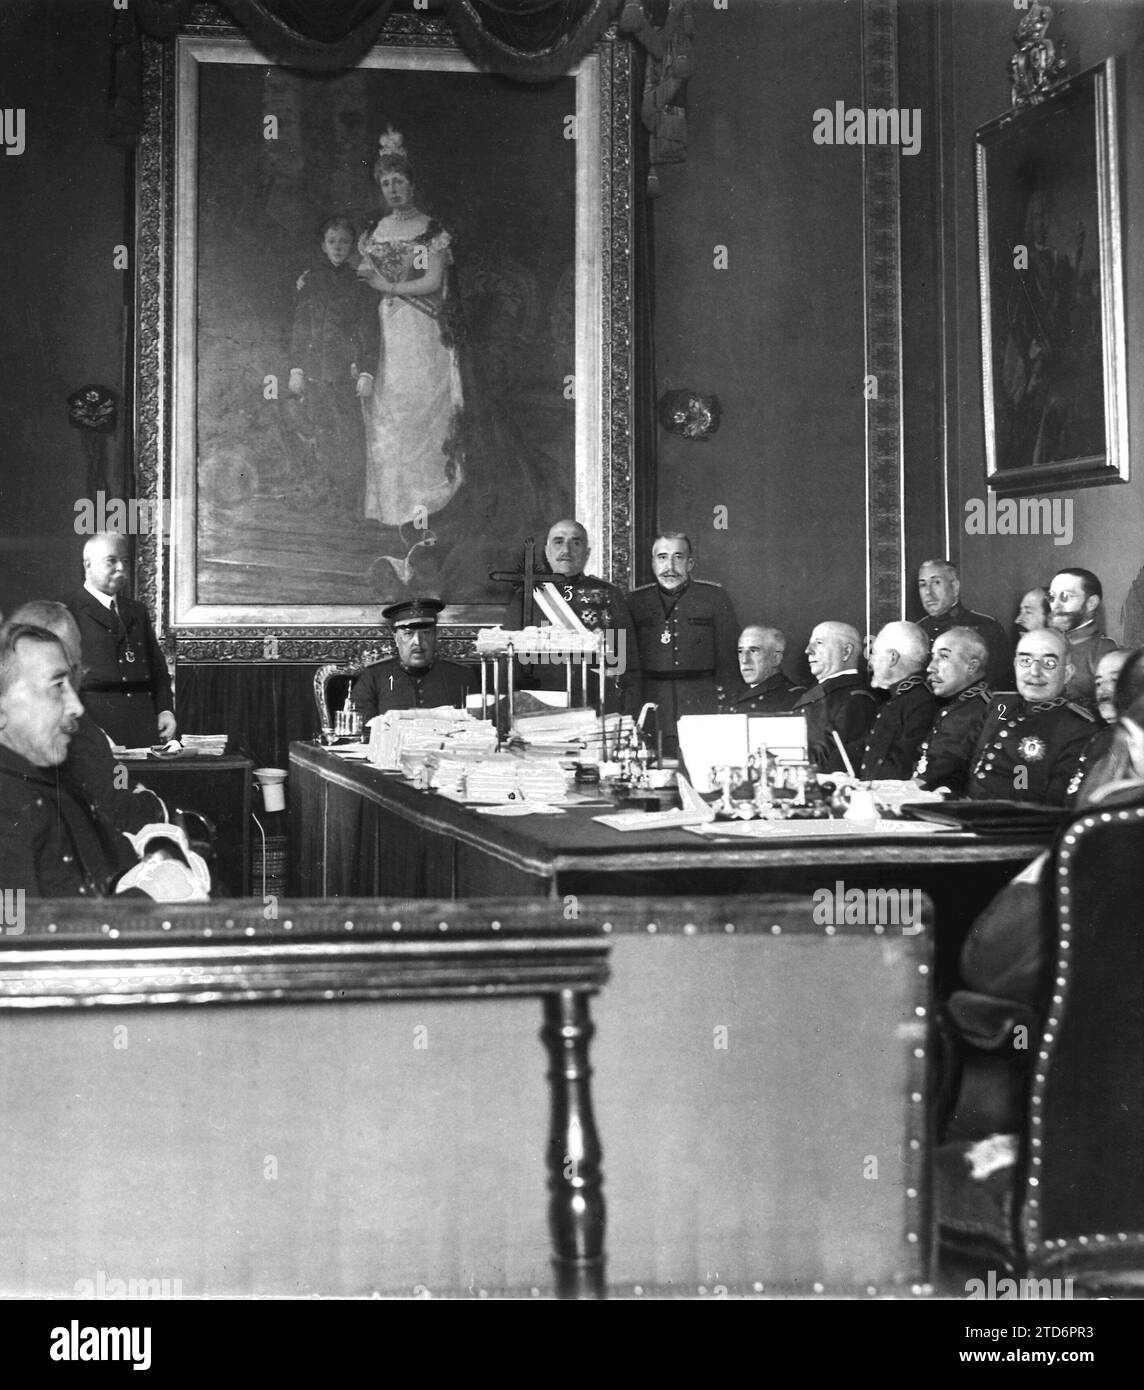 12/15/1923. Madrid. The Supreme Council of War and Navy. Session Held under the presidency of General Aguilera (1) to give oath of office to the New Councilors Mr. Carlos Blanco (2) and Mr. José Zamora (3). Credit: Album / Archivo ABC / José Zegri Stock Photo